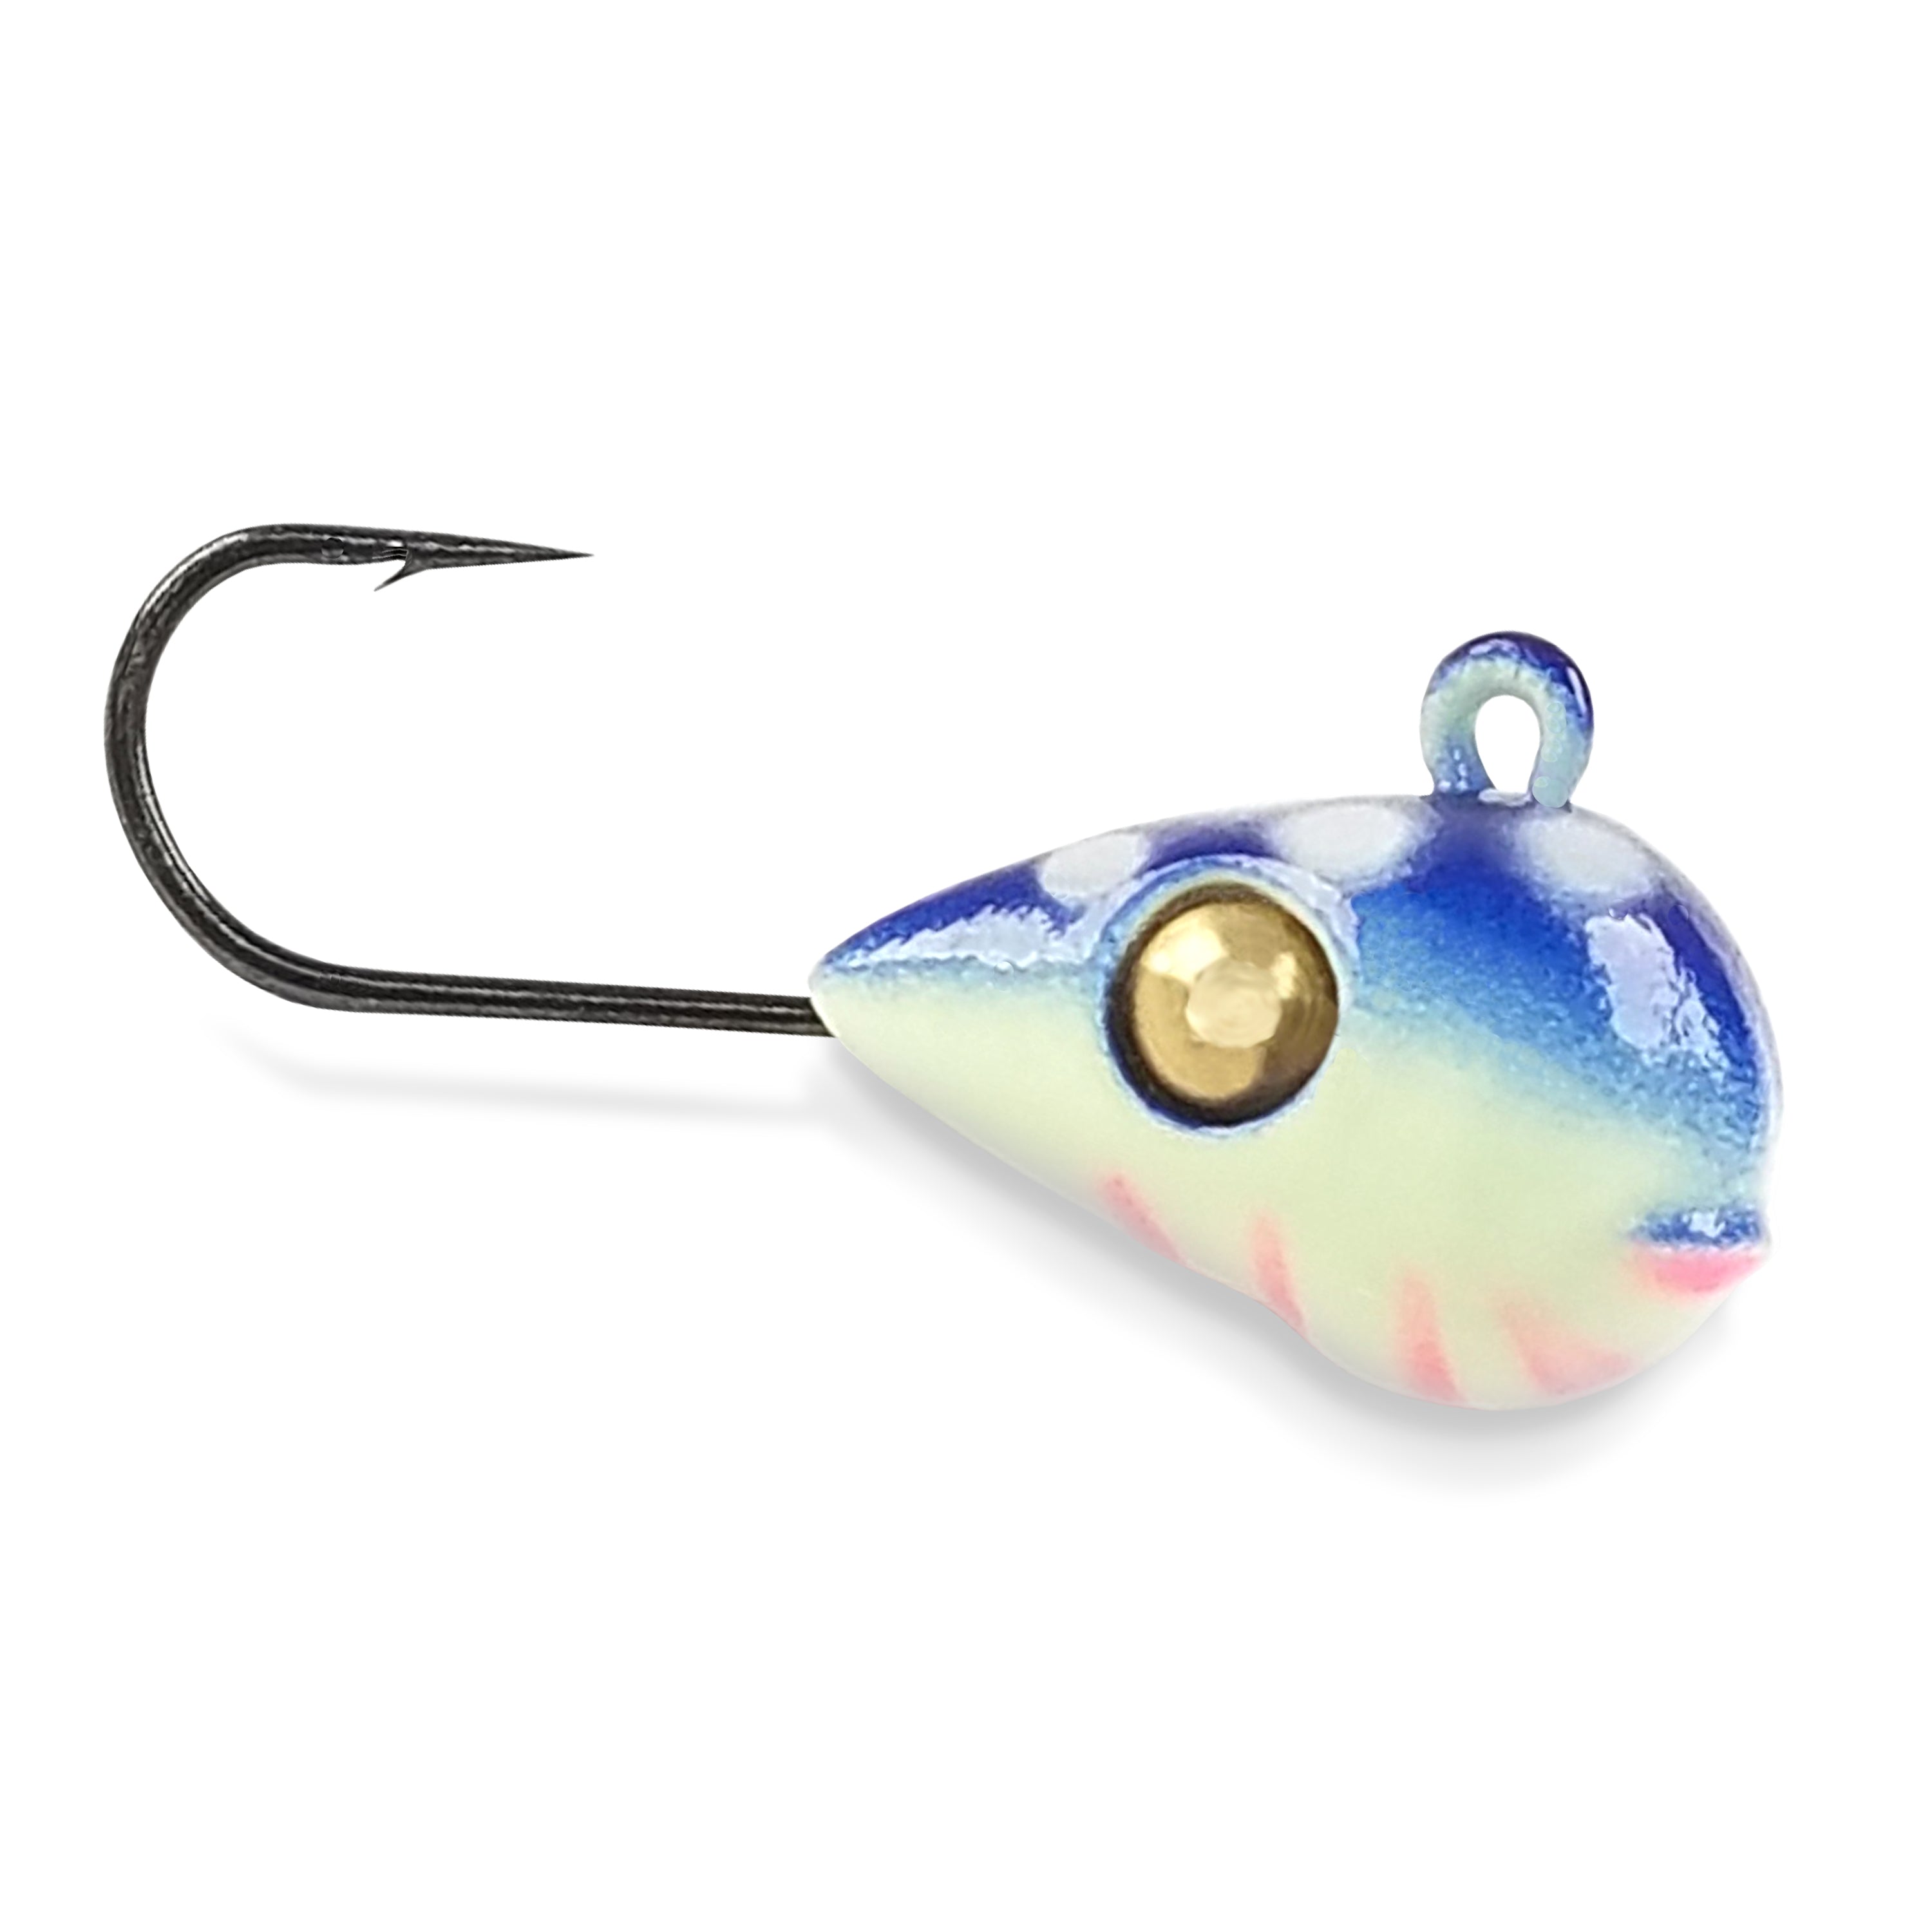 Acme Tackle Tungsten Pendu Ice Jig Bloody Nose 2 mm